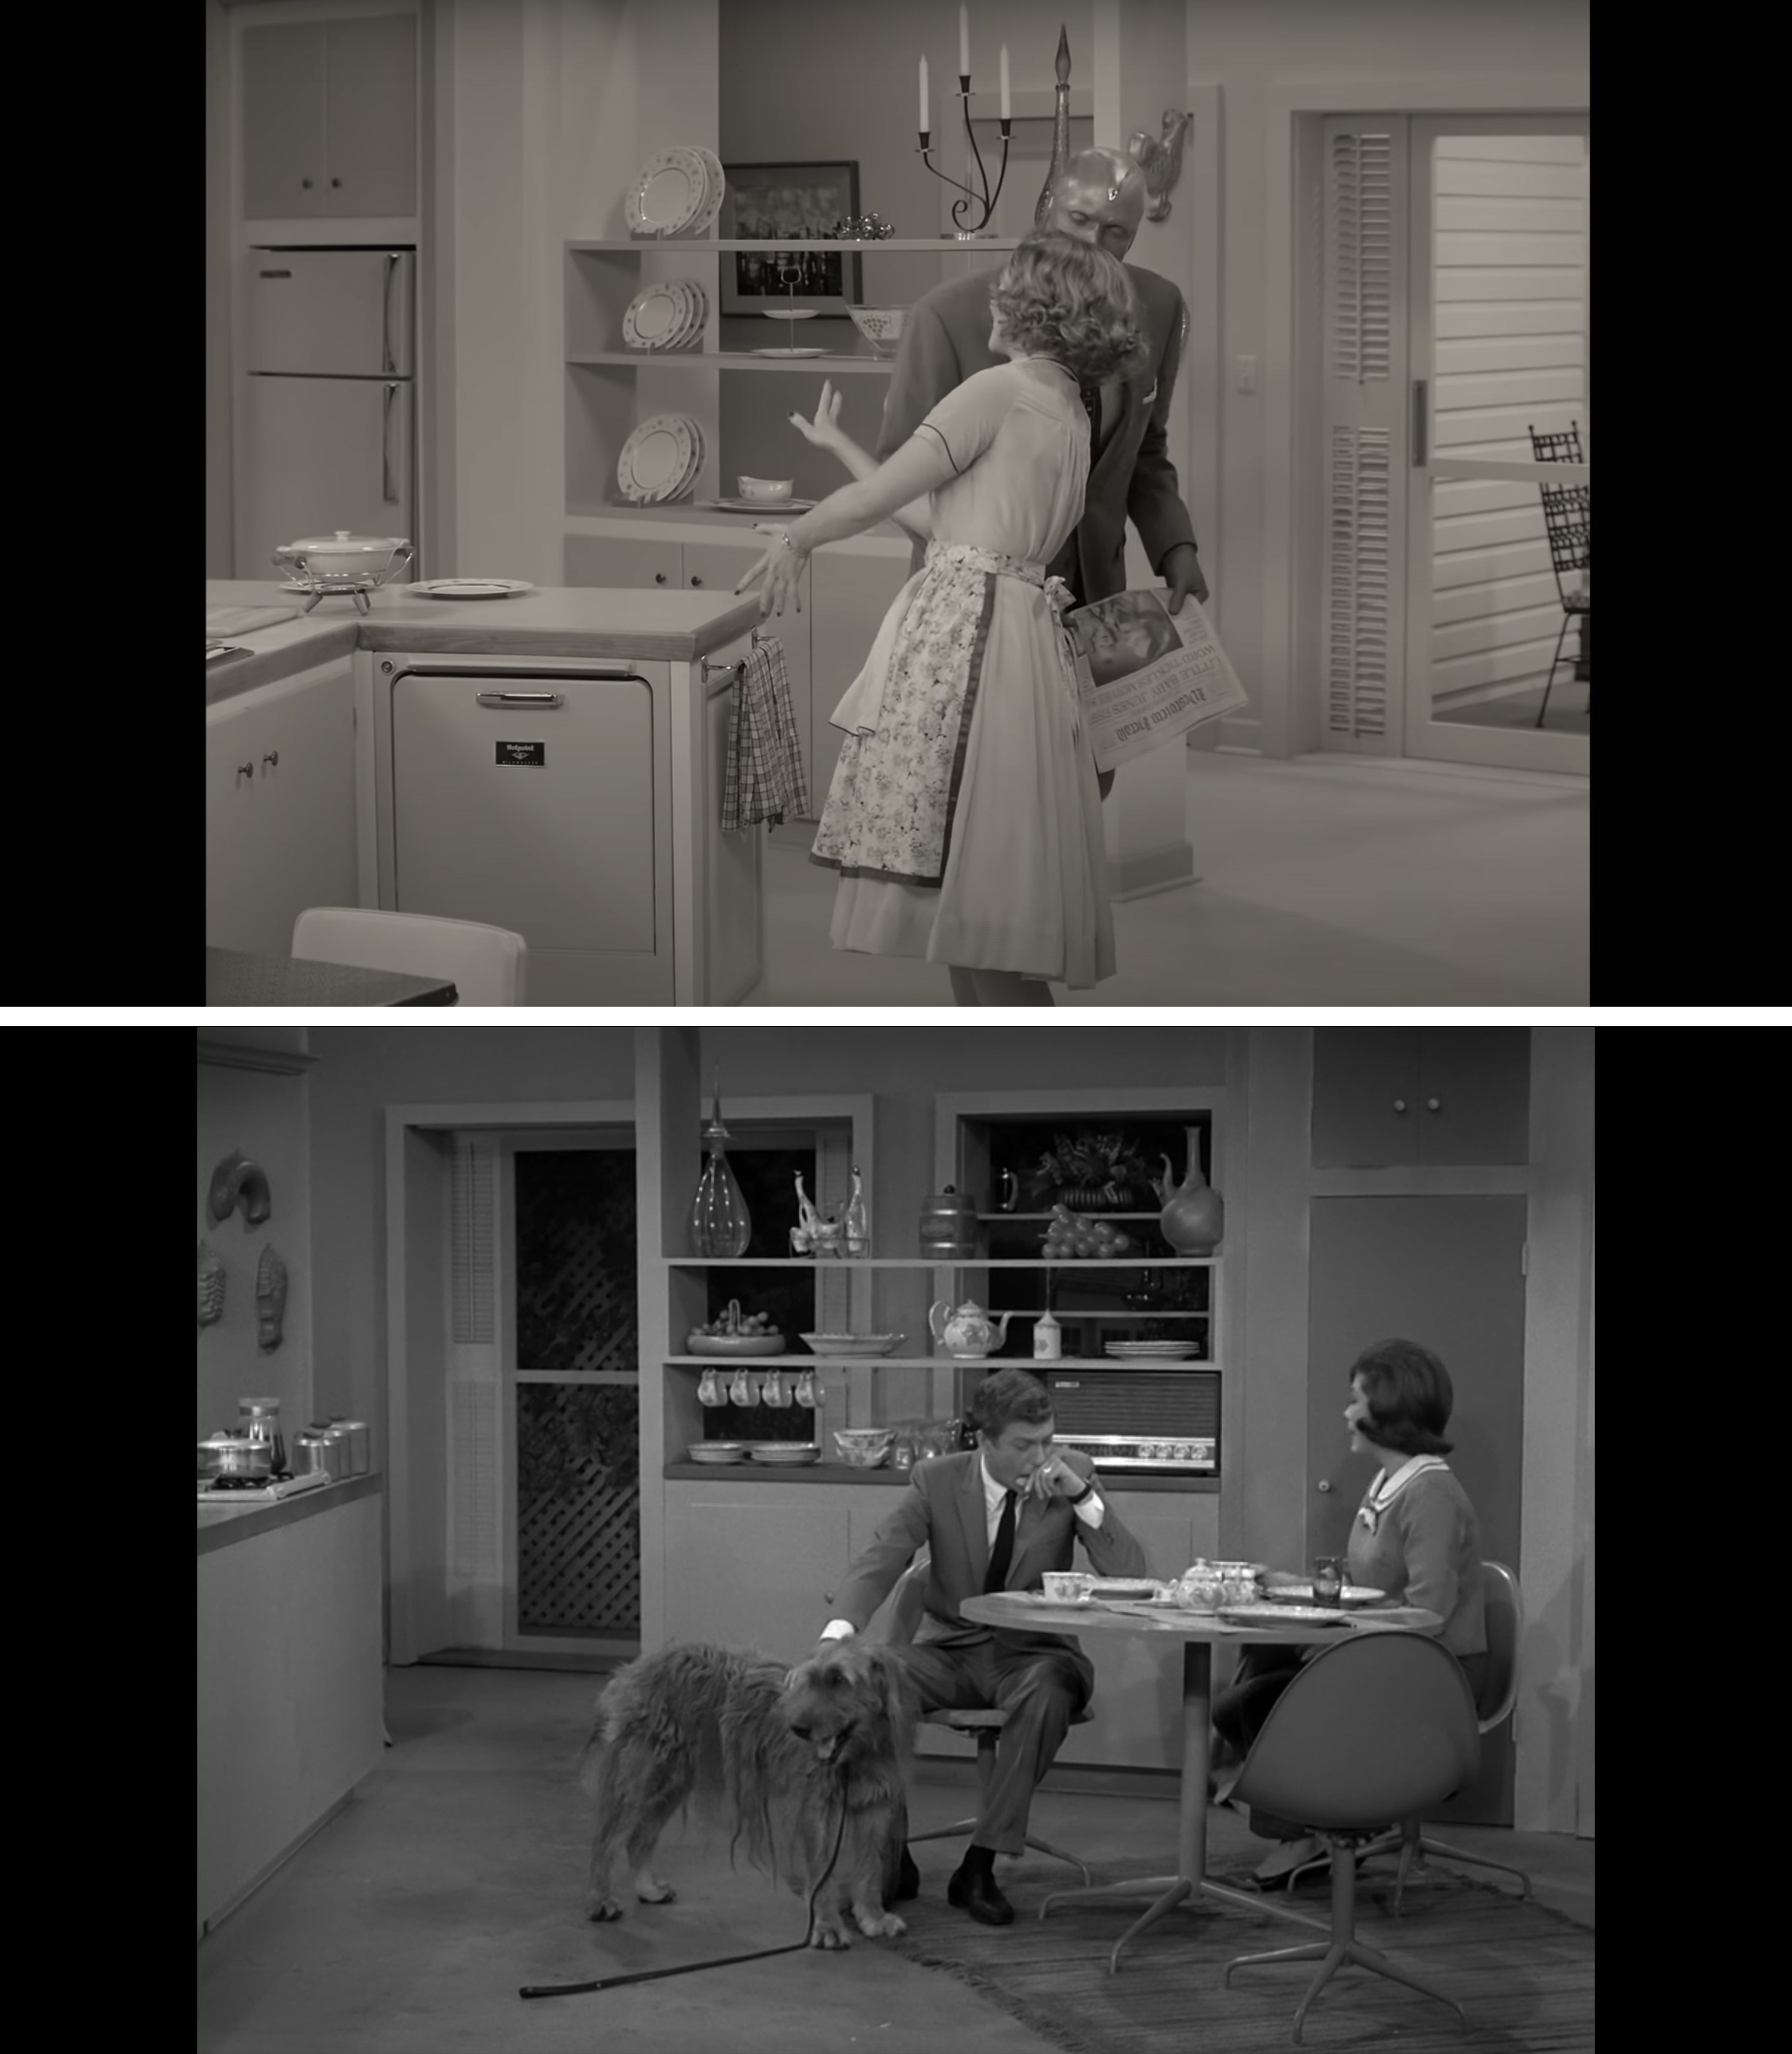 The kitchen in WandaVision resembling the kitchen from The Dick Van Dyke show